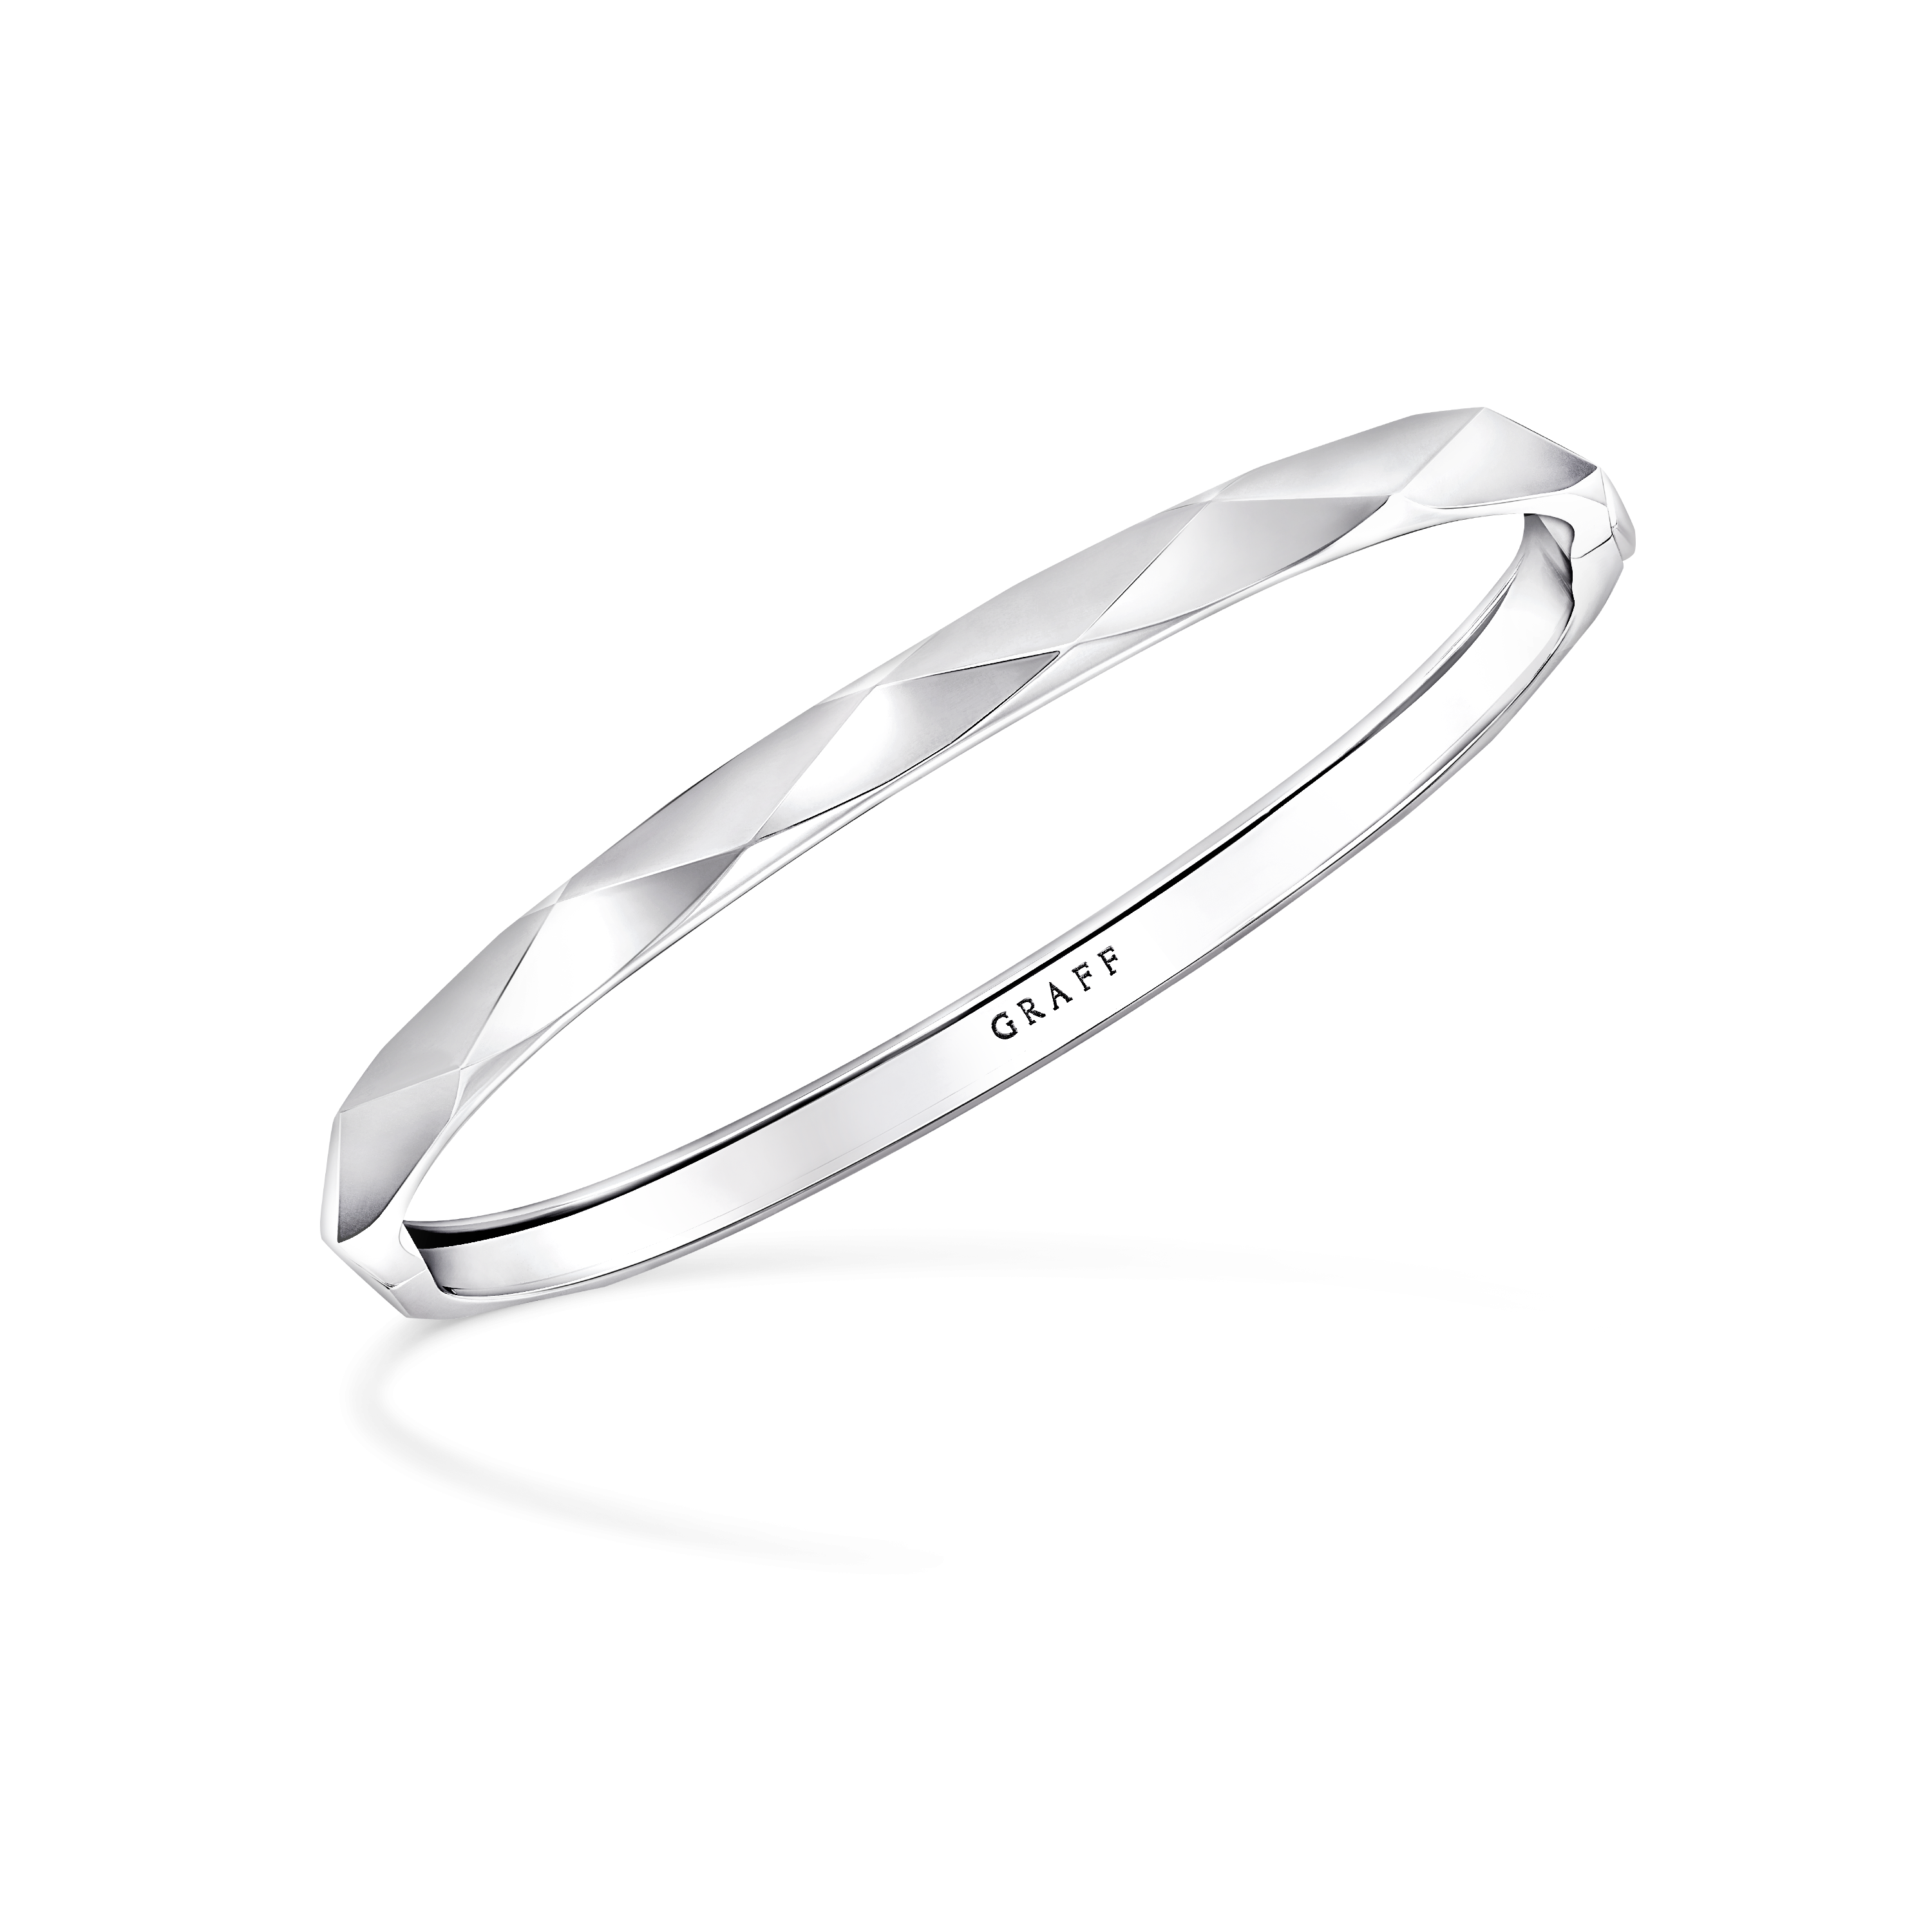 Image of Laurence Graff Signature in White Gold